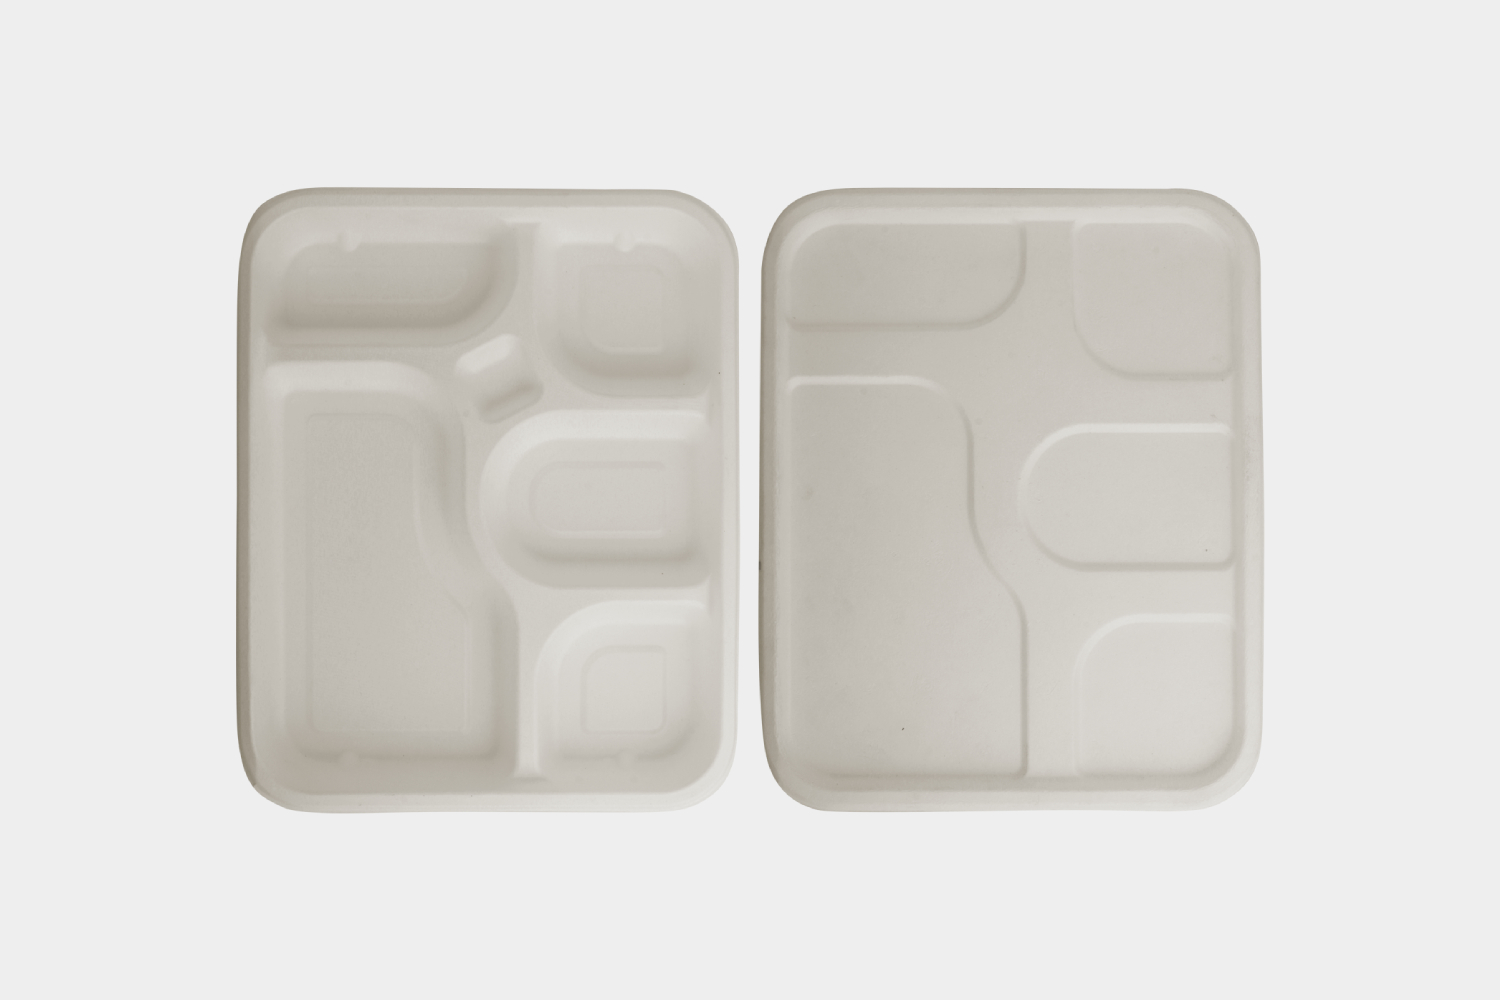 https://www.ecolates.com/wp-content/uploads/2023/02/5-compartments-bagasse-lunch-tray-with-lid-top-bottom-view.jpg